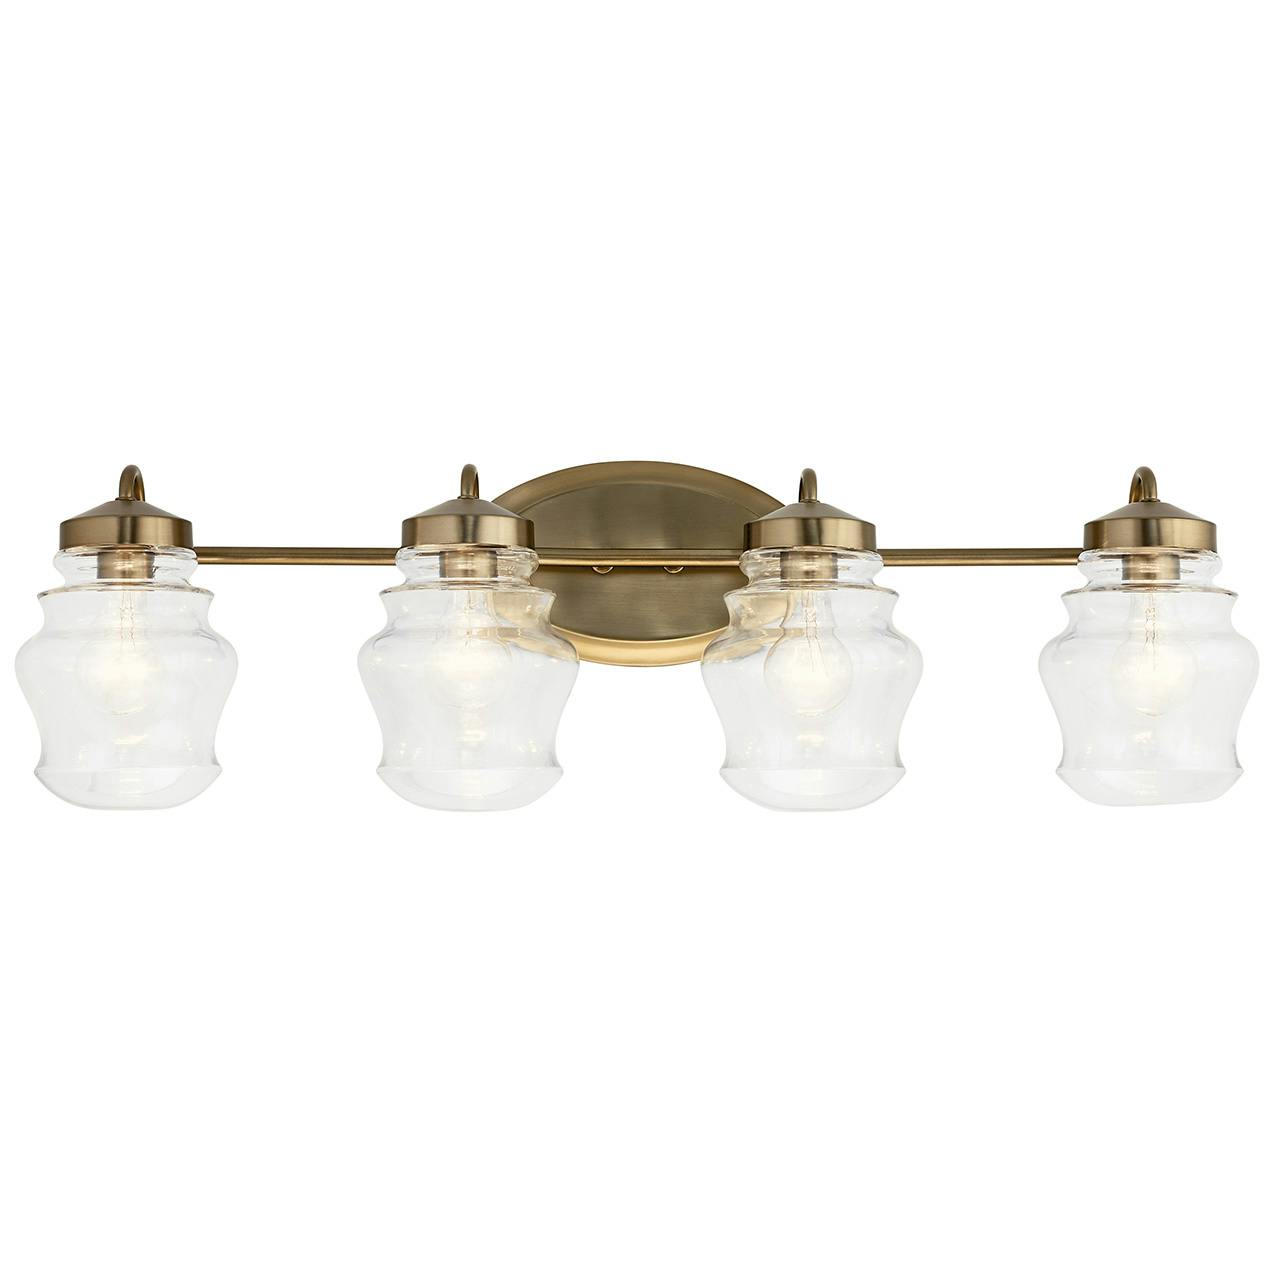 The Janiel 33.25" 4 Light Vanity Light Bronze facing down on a white background